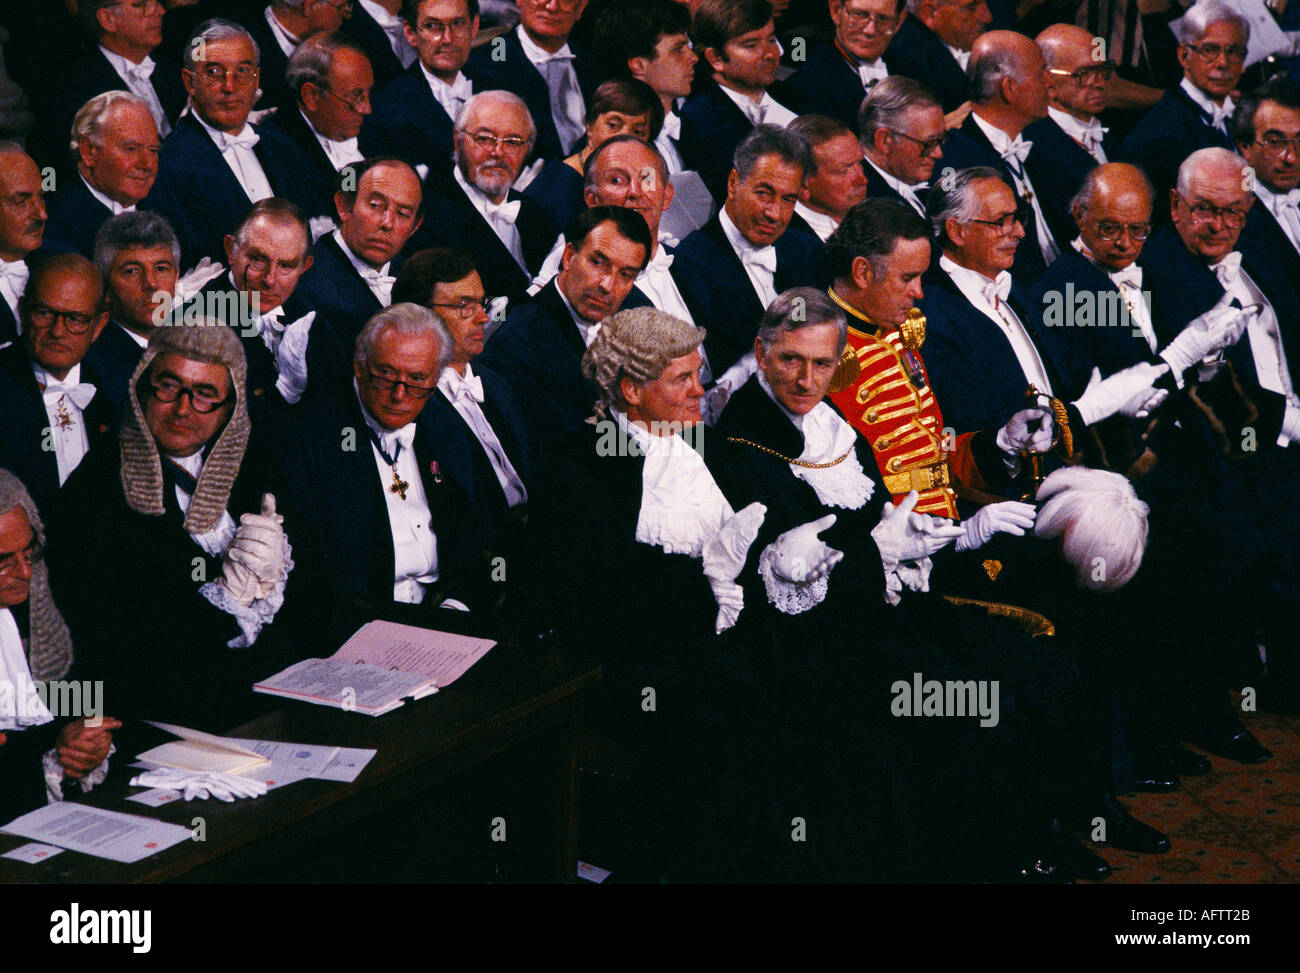 Pomp and Ceremony, City of London Lord Mayors Banquet white tie formal event in the Guildhall. London England 1992. 1990s UK HOMER SYKES Stock Photo